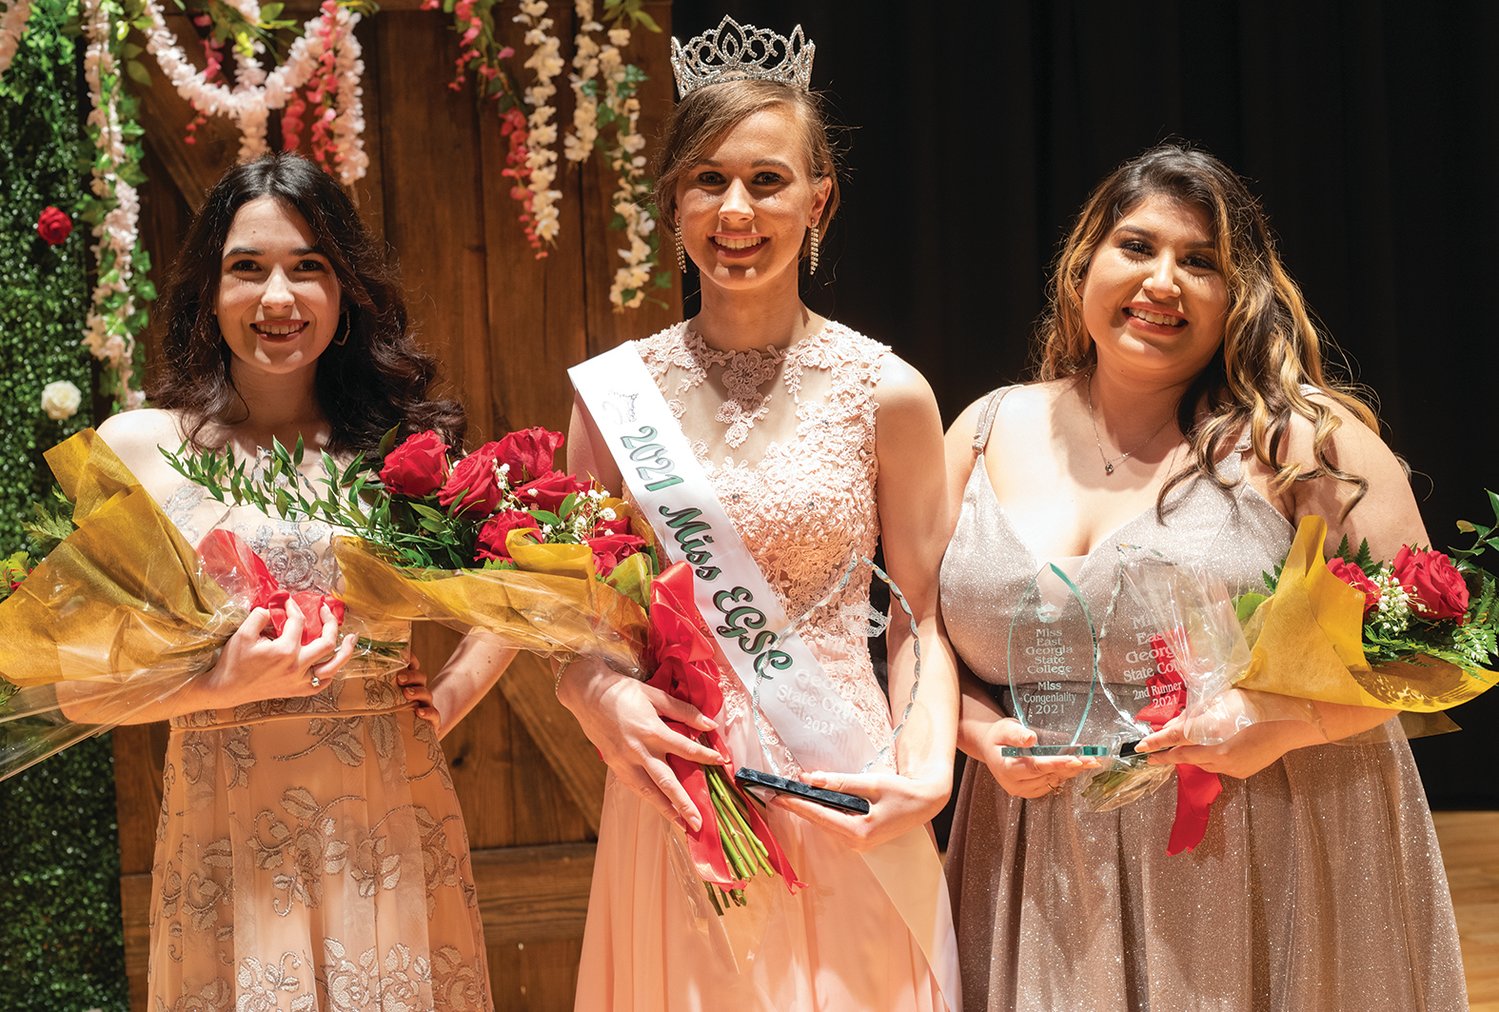 Anita Cerpovicz crowned Miss EGSC 2021